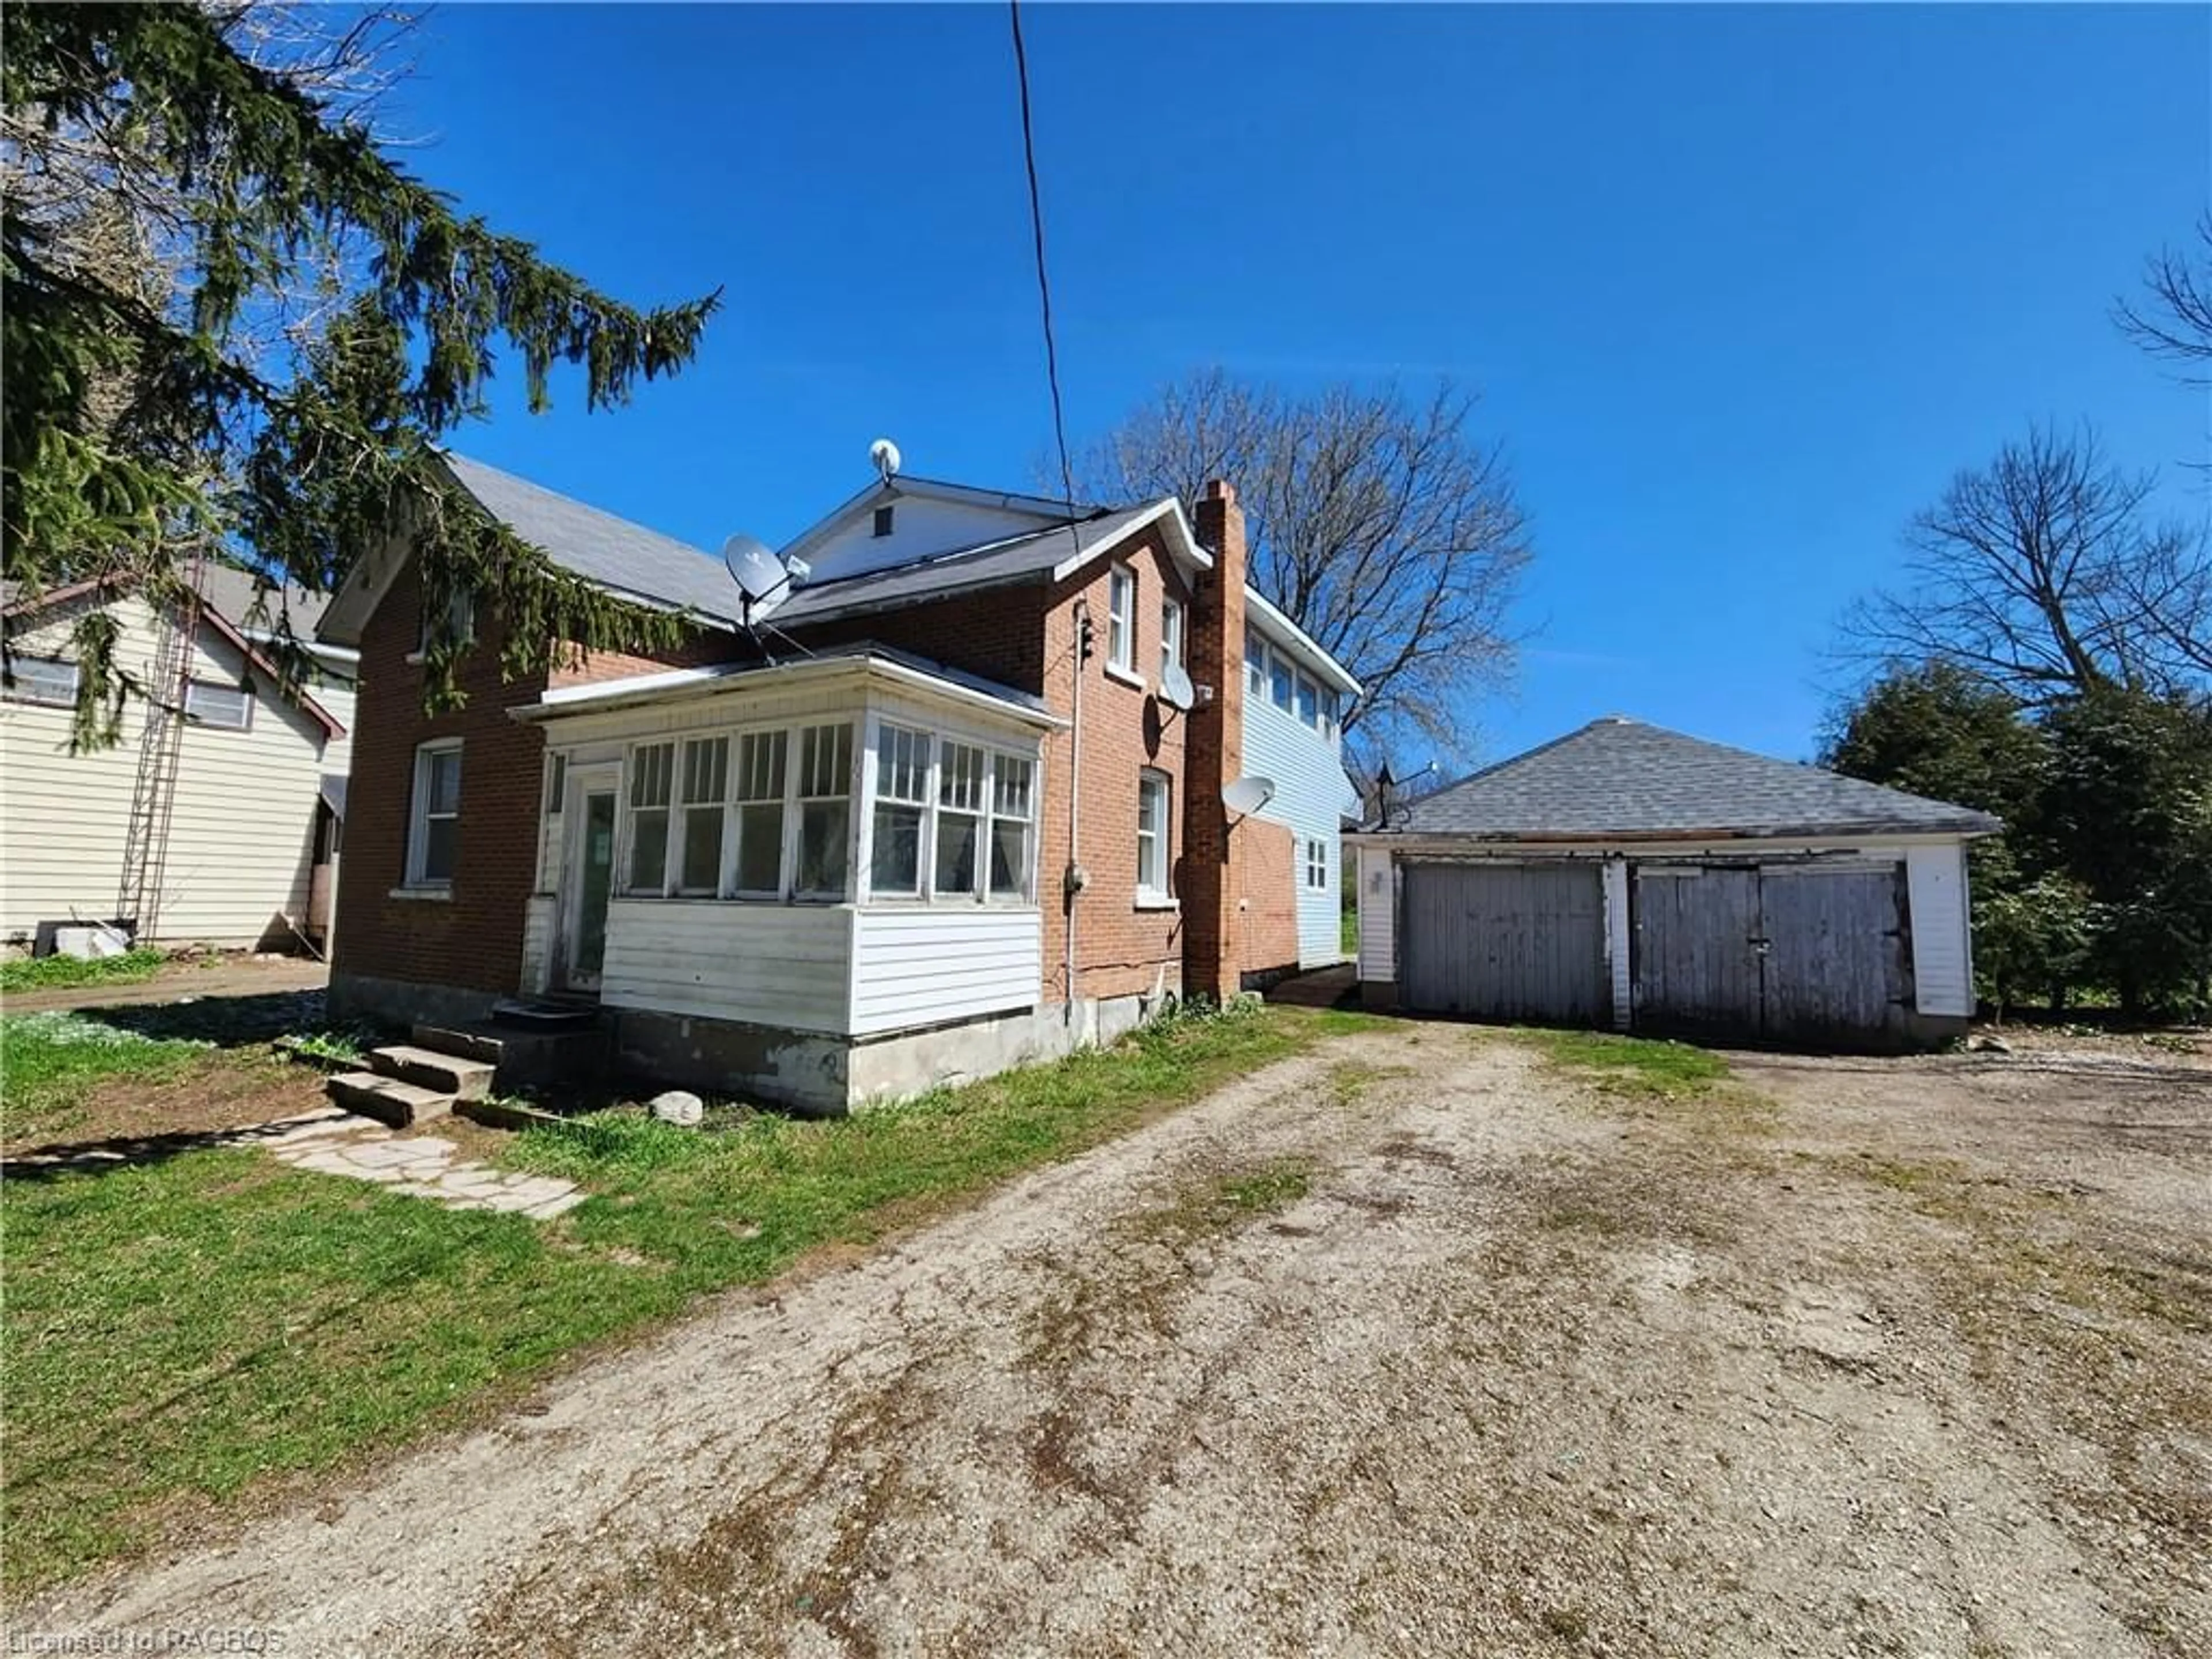 Frontside or backside of a home for 136239 Grey Road 40, Desboro Ontario N0H 1G0